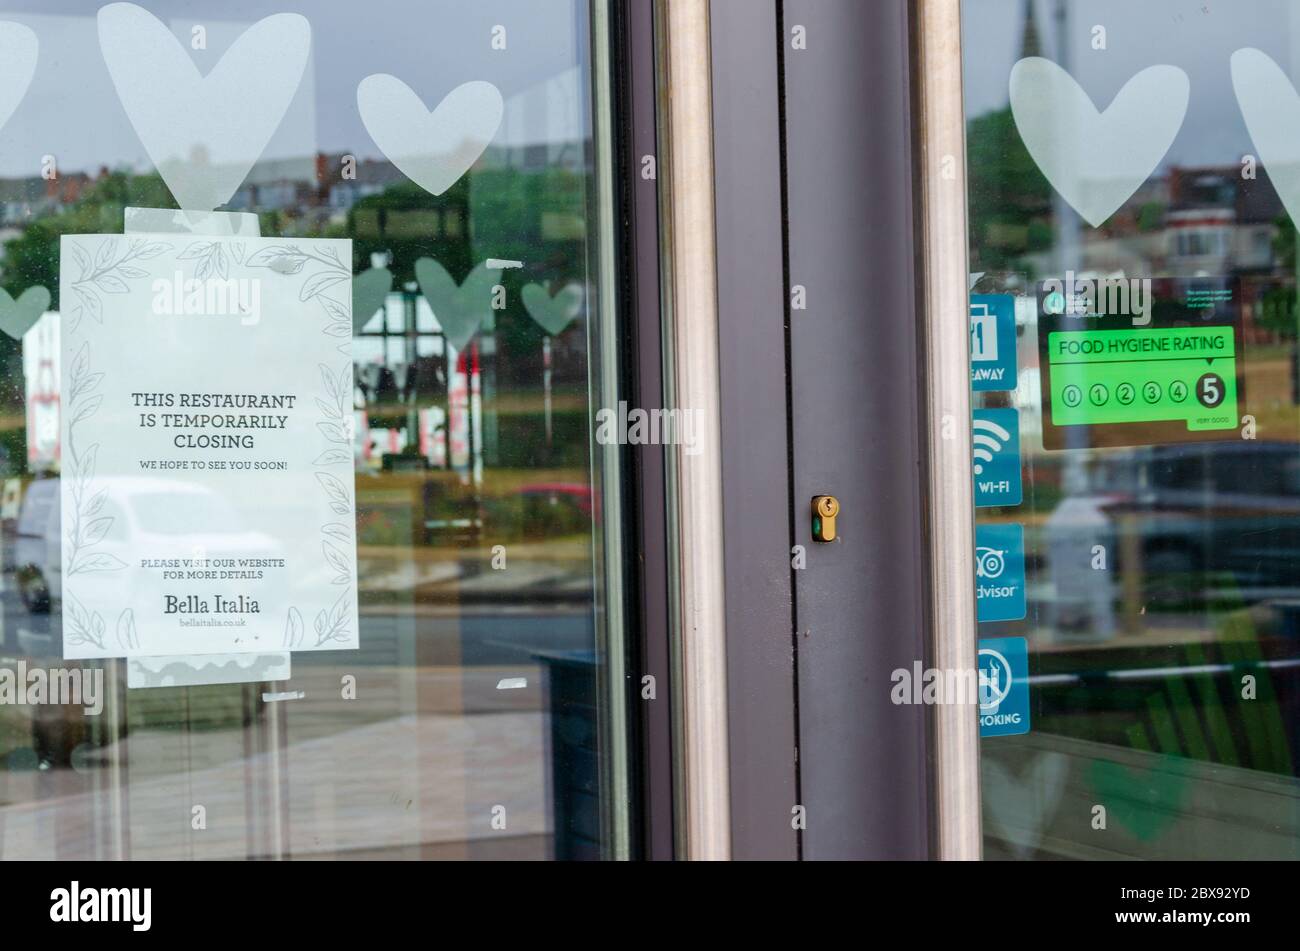 New Brighton, UK: Jun 3, 2020: A poster displayed in the window of a Bella Italia restaurant states that the business is closed. This is due to the co Stock Photo